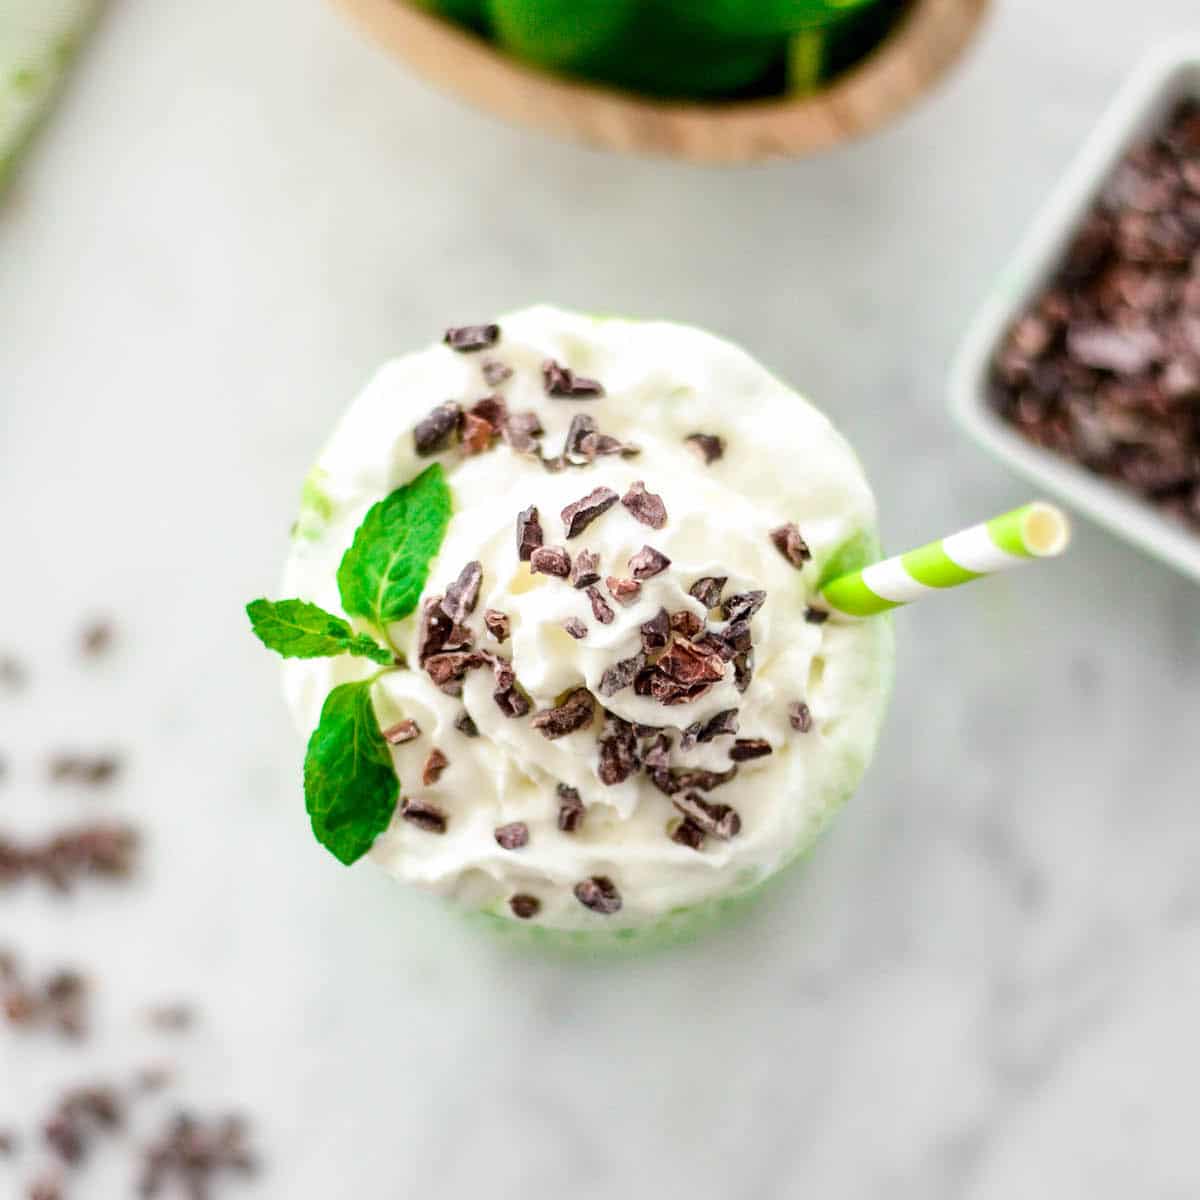 This Healthy Shamrock Shake recipe is made with 8 nutritious ingredients like avocados, spinach, Greek yogurt and is ready in 5 minutes! The perfect St. Patrick's Day treat that's naturally dyed green! No food coloring!